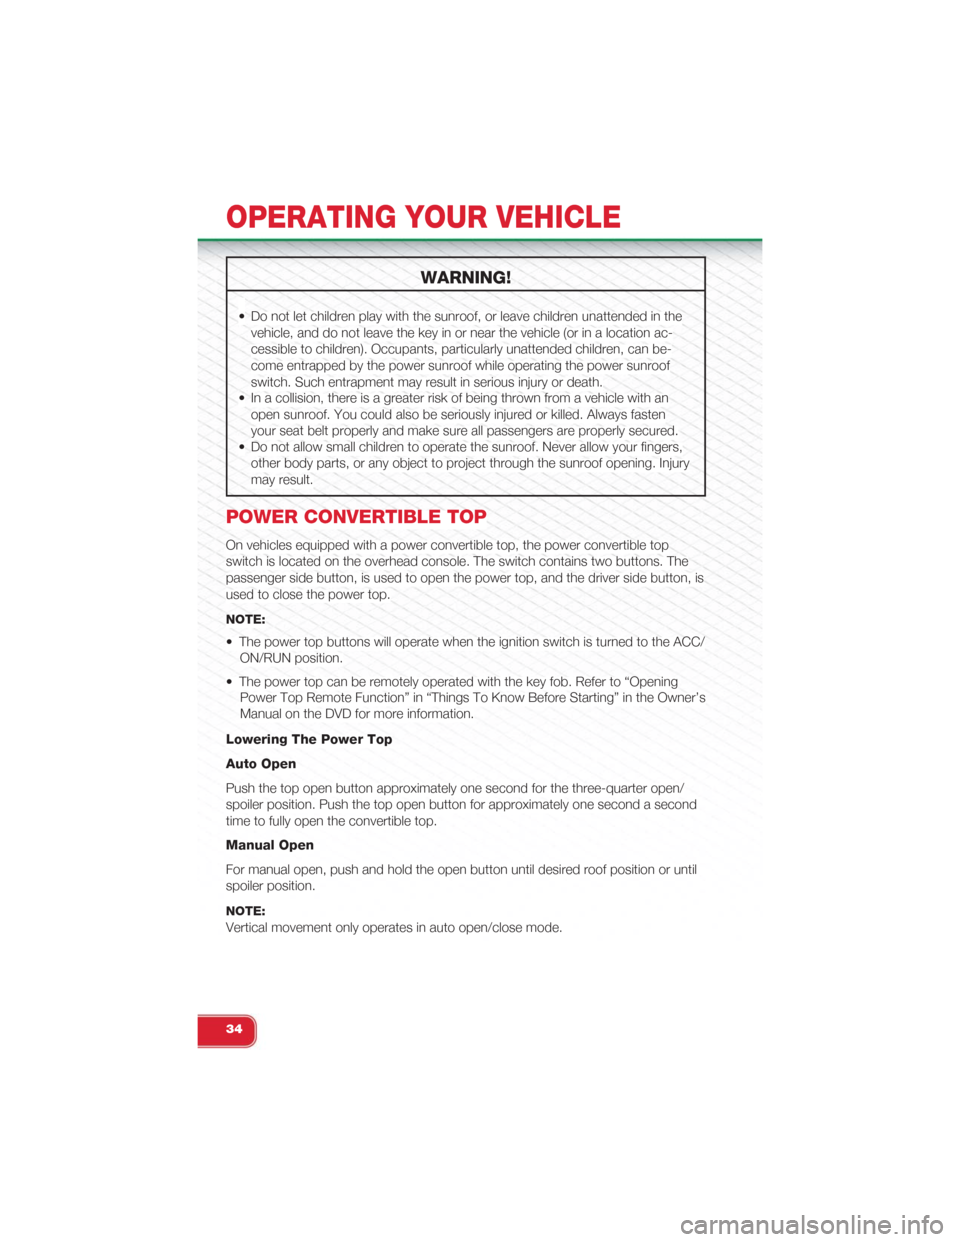 FIAT 500 ABARTH 2015 2.G Owners Guide WARNING!
• Do not let children play with the sunroof, or leave children unattended in the
vehicle, and do not leave the key in or near the vehicle (or in a location ac-
cessible to children). Occupa